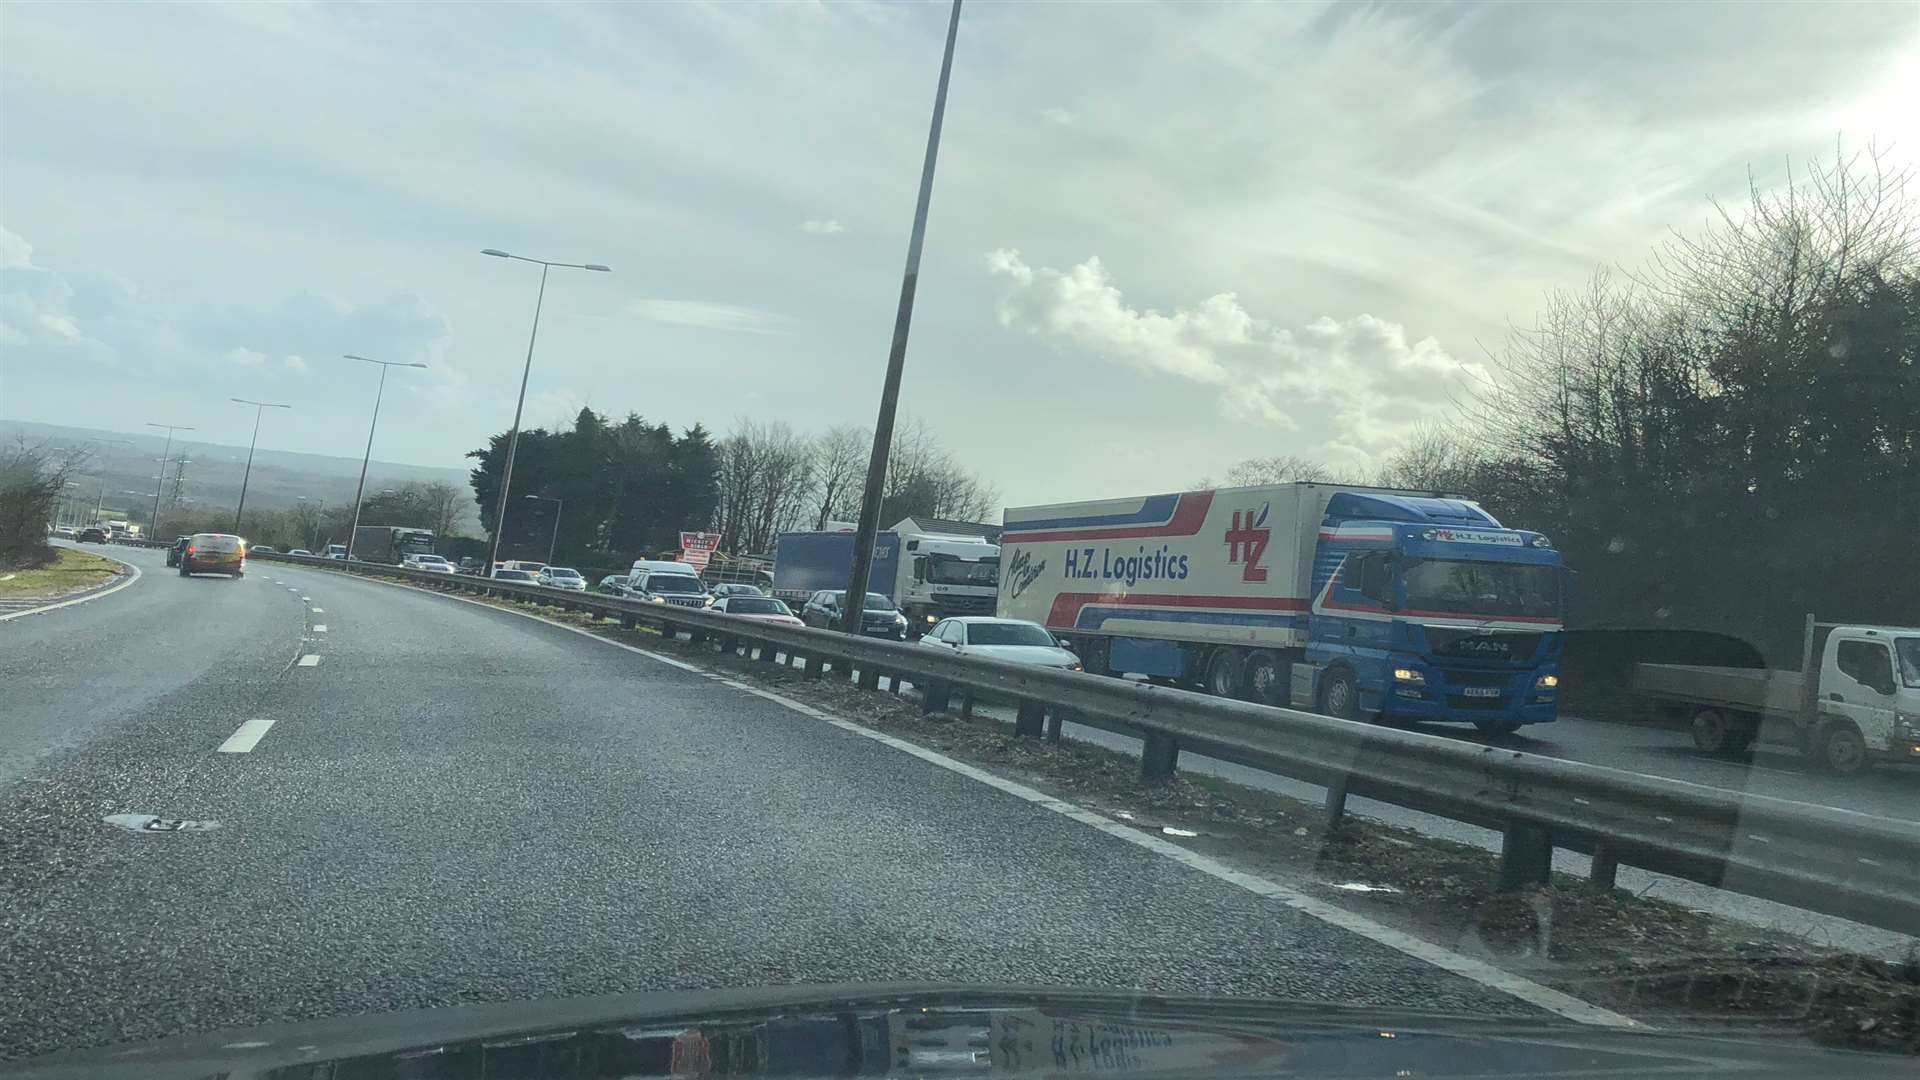 Traffic is queuing on the Chatham-bound carriageway. Credit: Steve Salter.